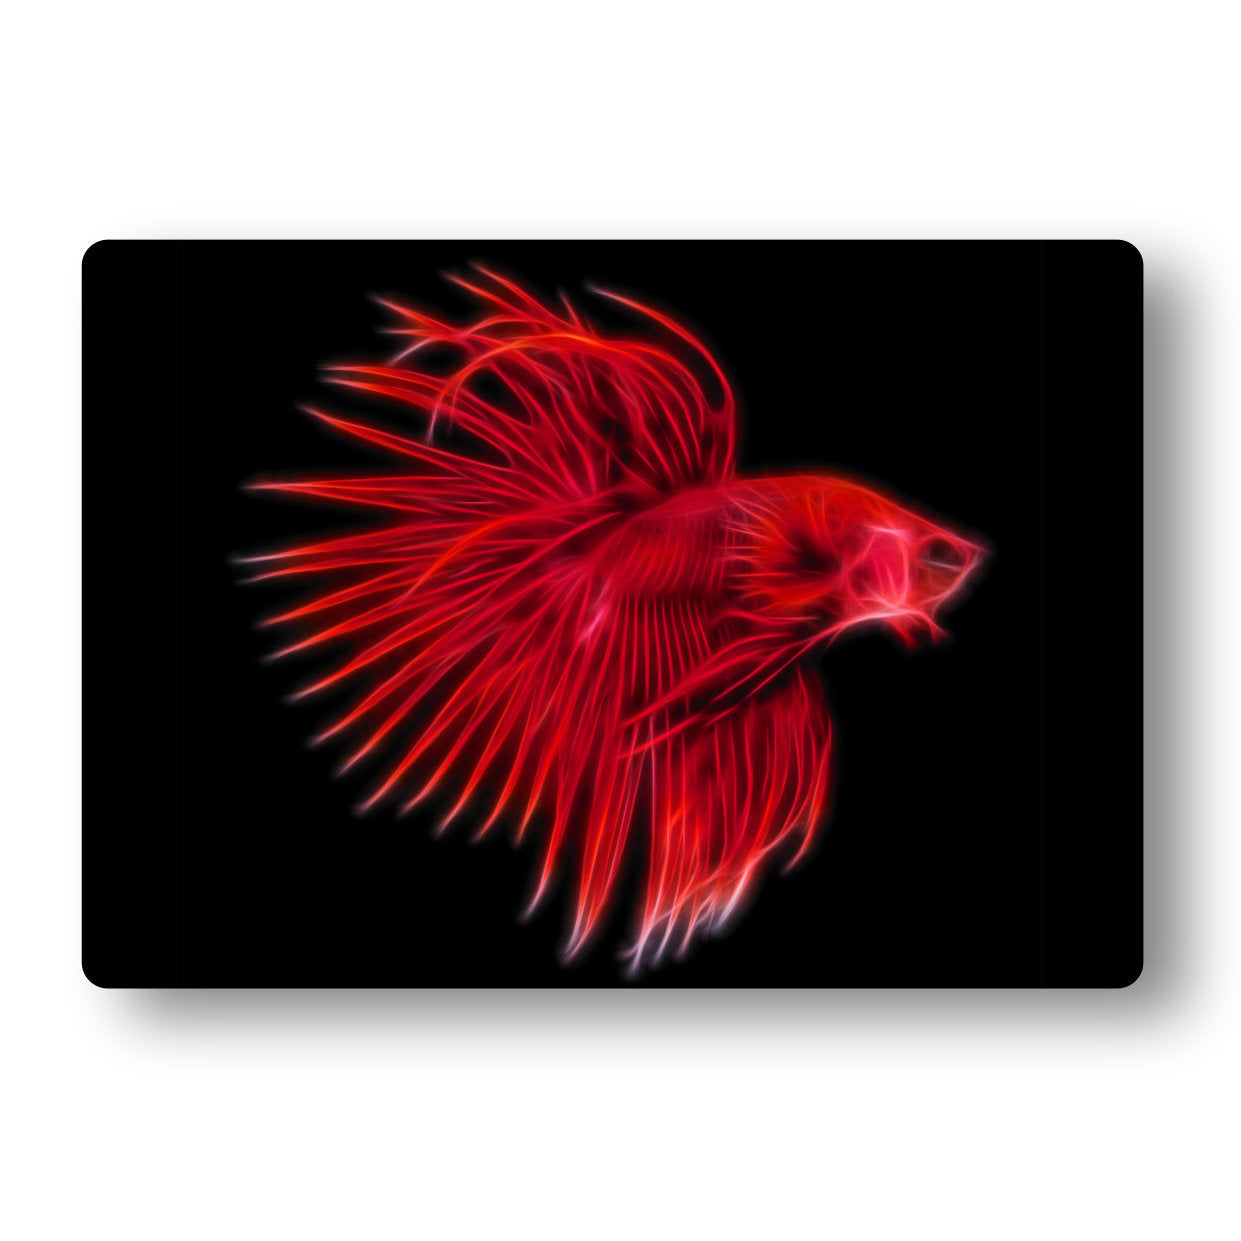 Red Crowntail Betta Aluminium Metal Wall Plaque